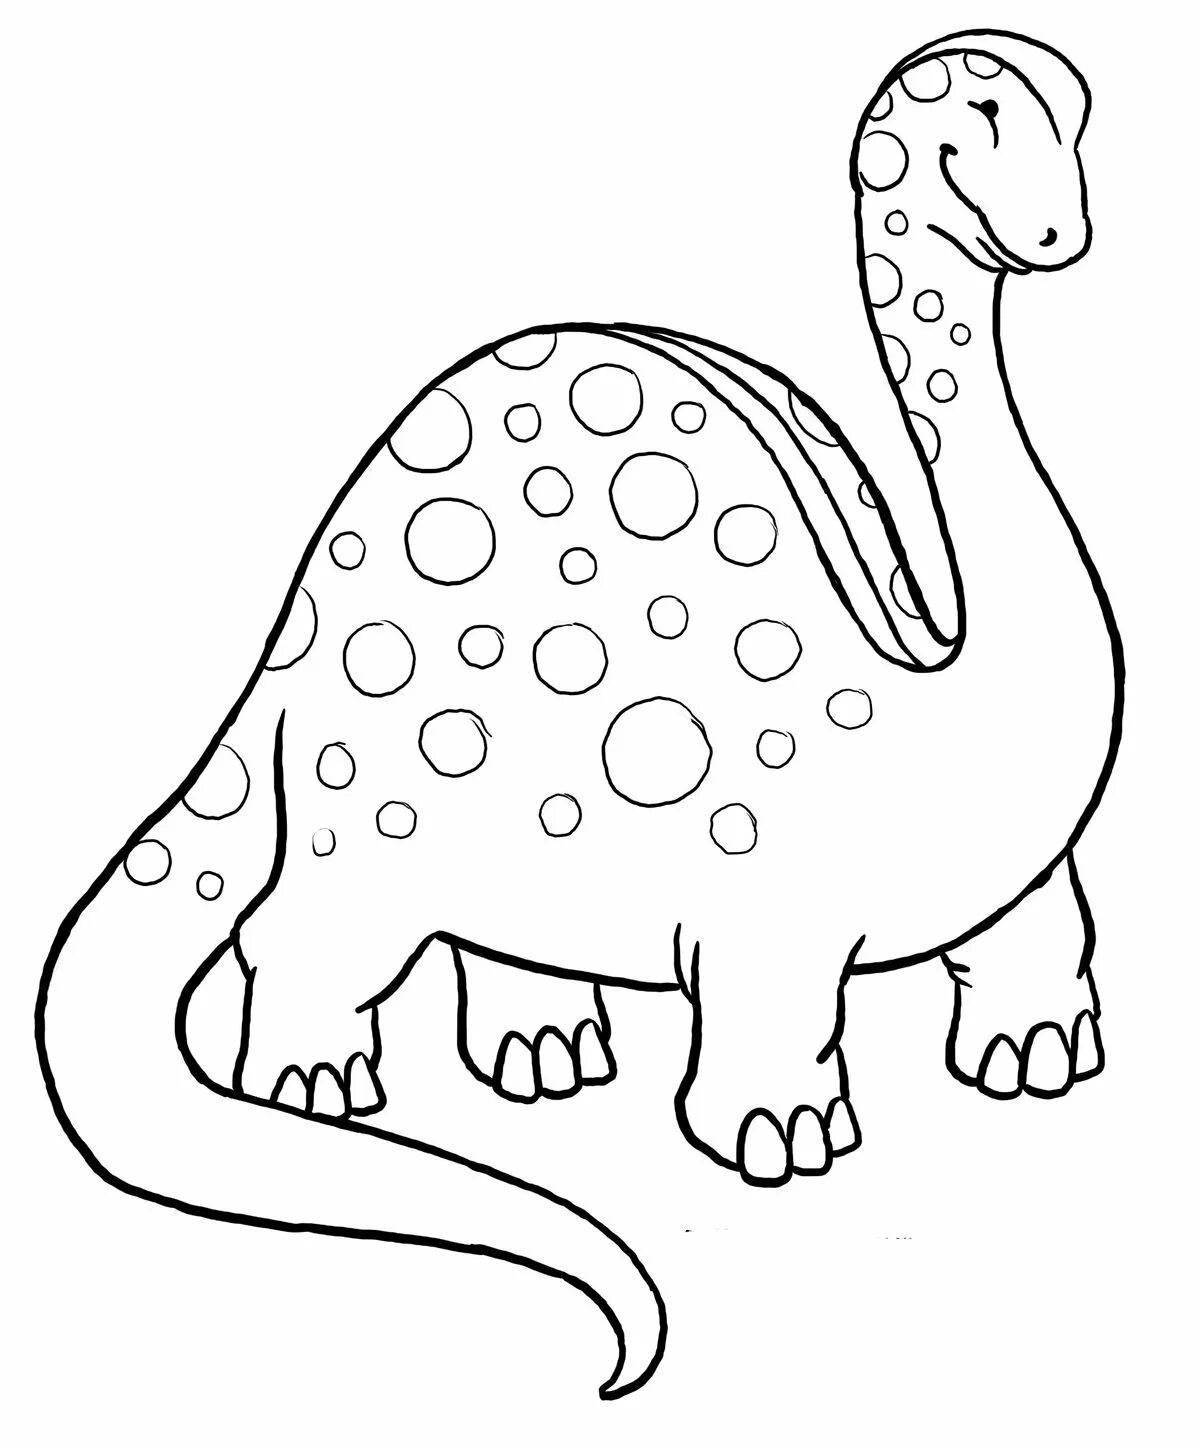 Fascinating dinosaur drawings to color in